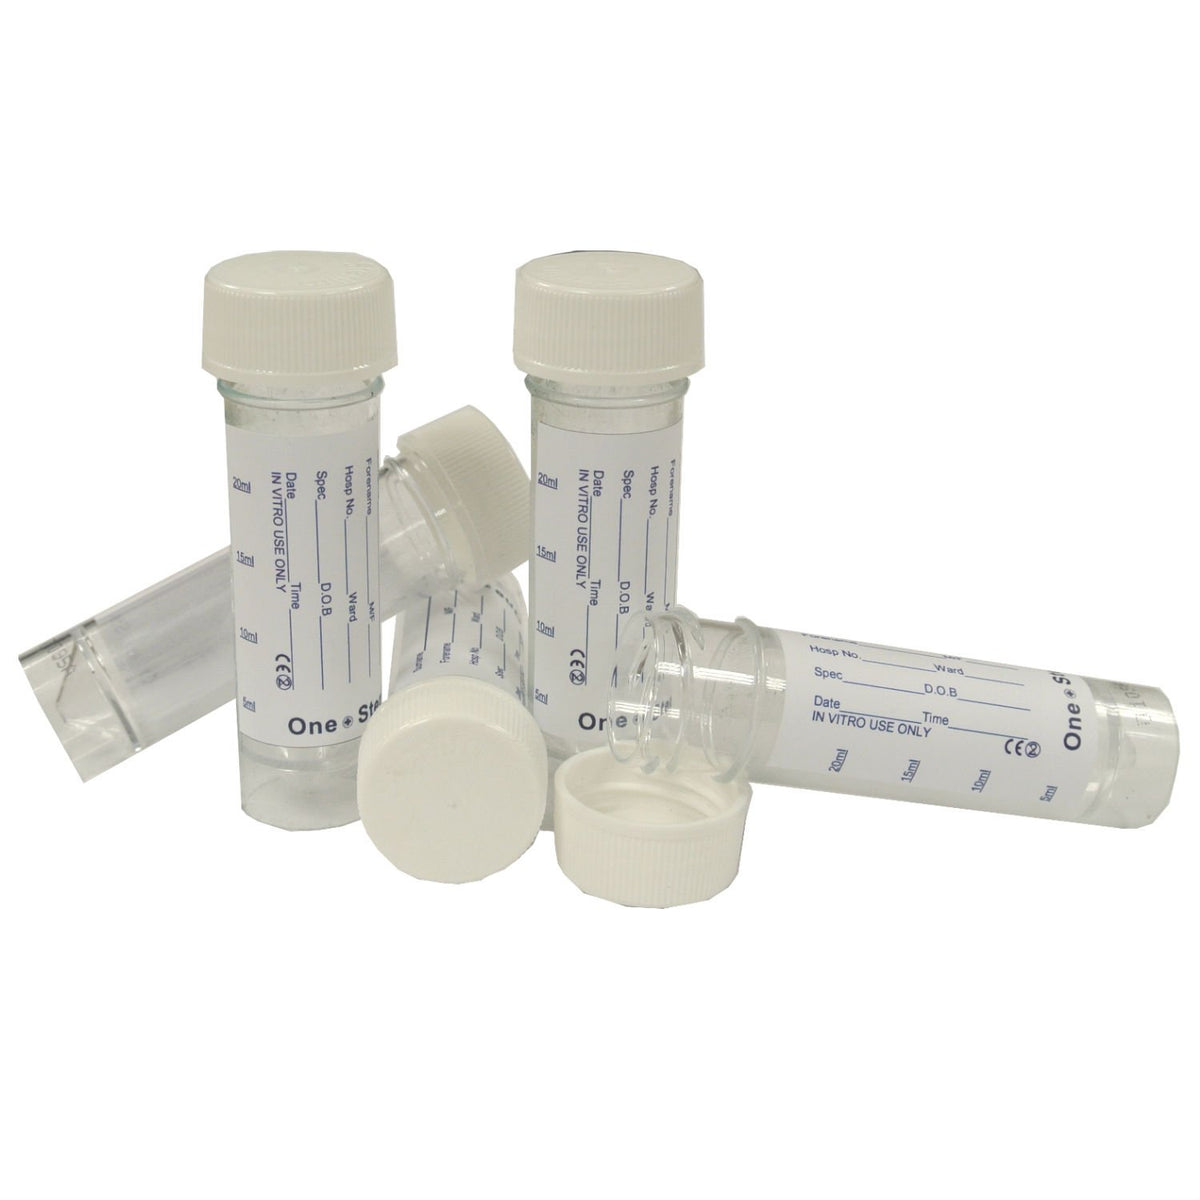 5 x 30ml Universal Container With Label (Urine Sample)